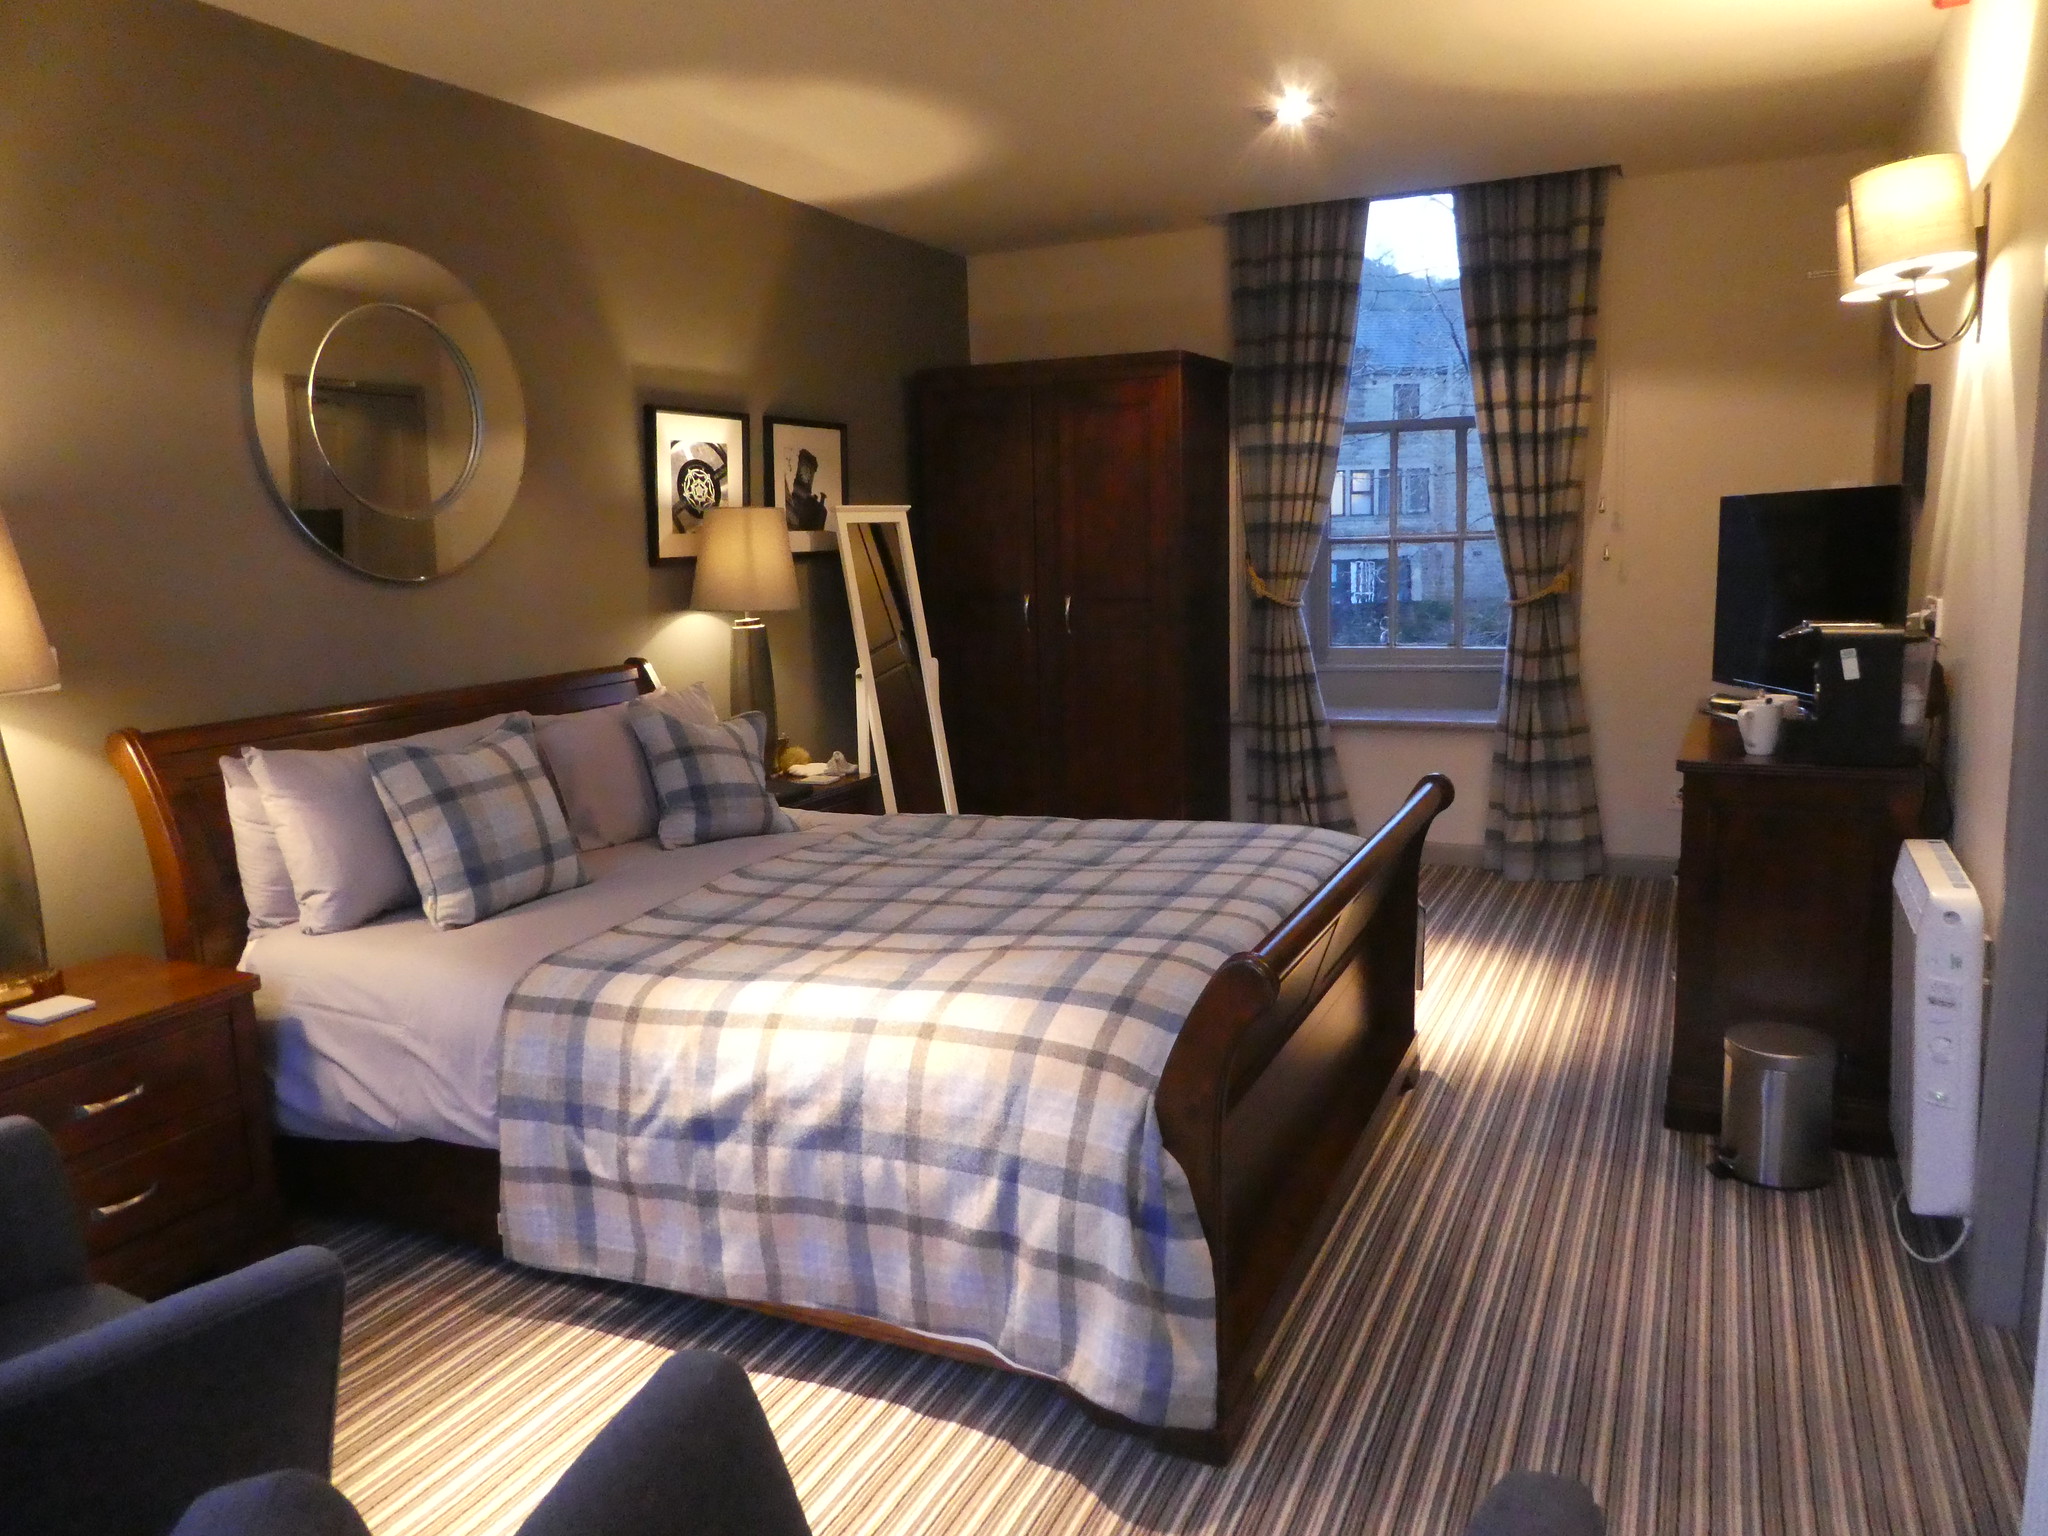 Our beautiful room at the White Lion Hotel, Hebden Bridge